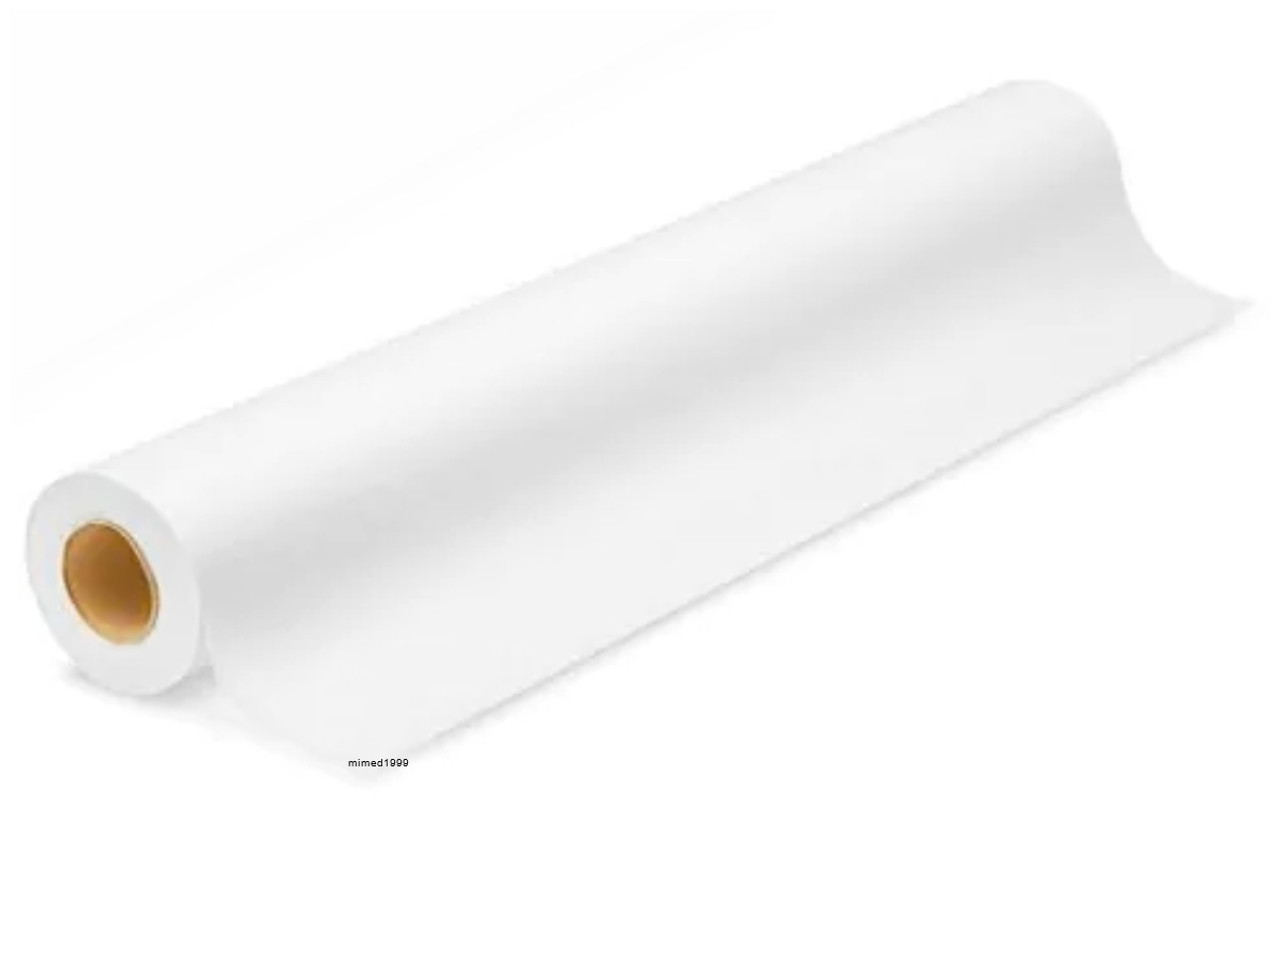 McKesson Smooth Table Paper White, 21 inch x 225 Feet - 12/Case